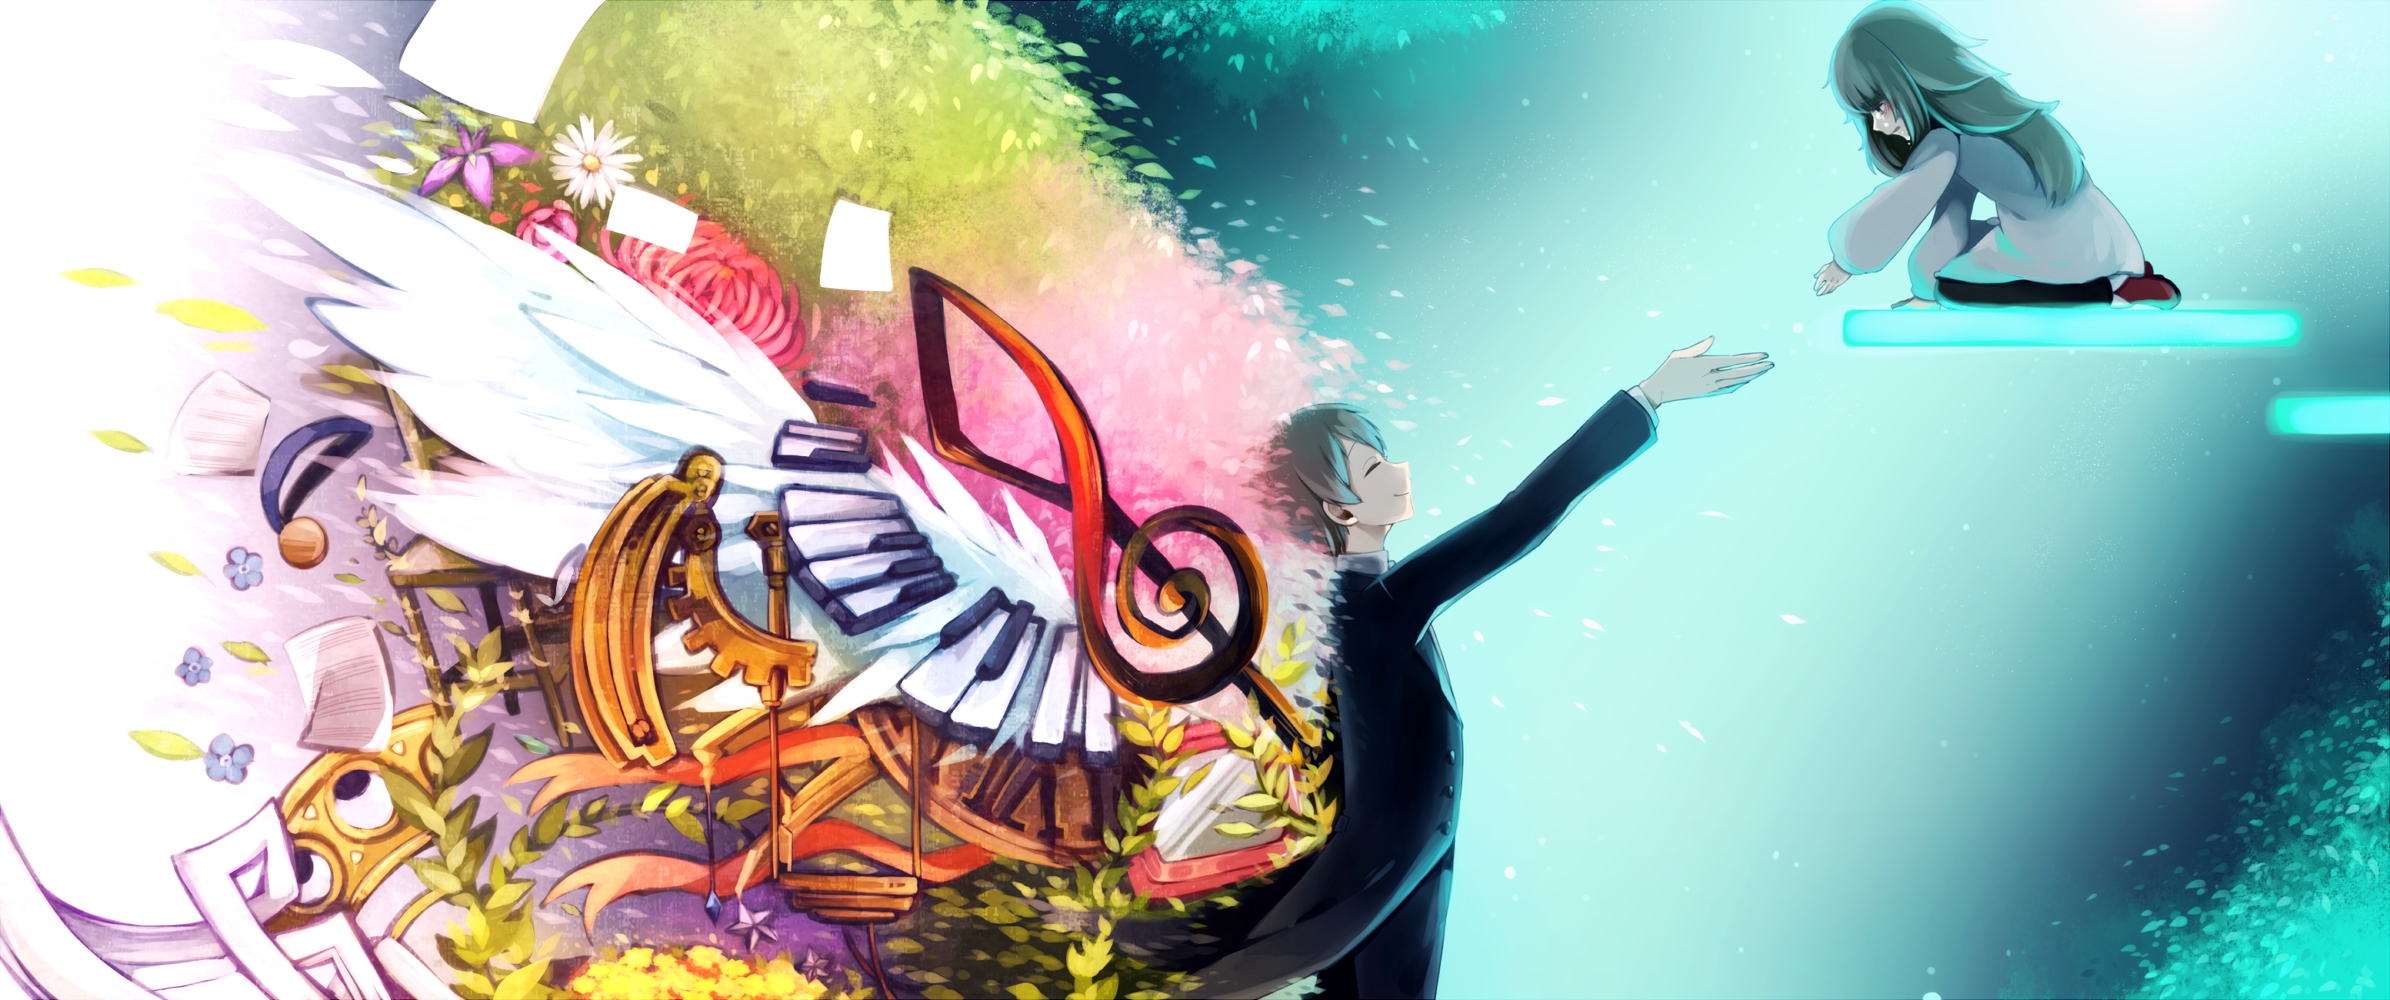 Deemo High Quality Background on Wallpapers Vista